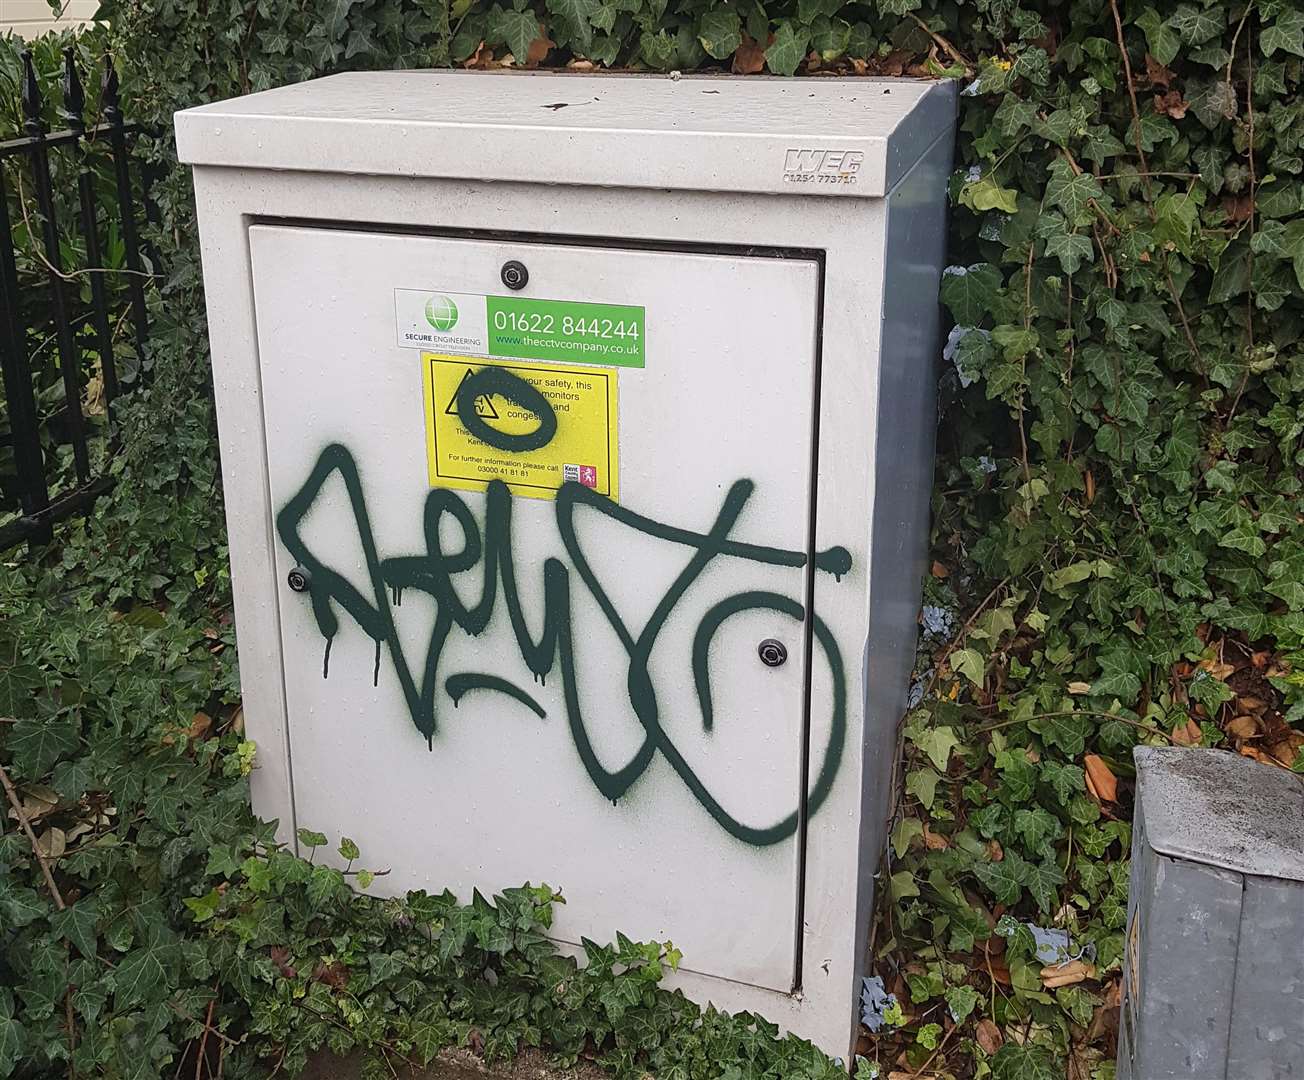 One of the familiar tags (6532136)